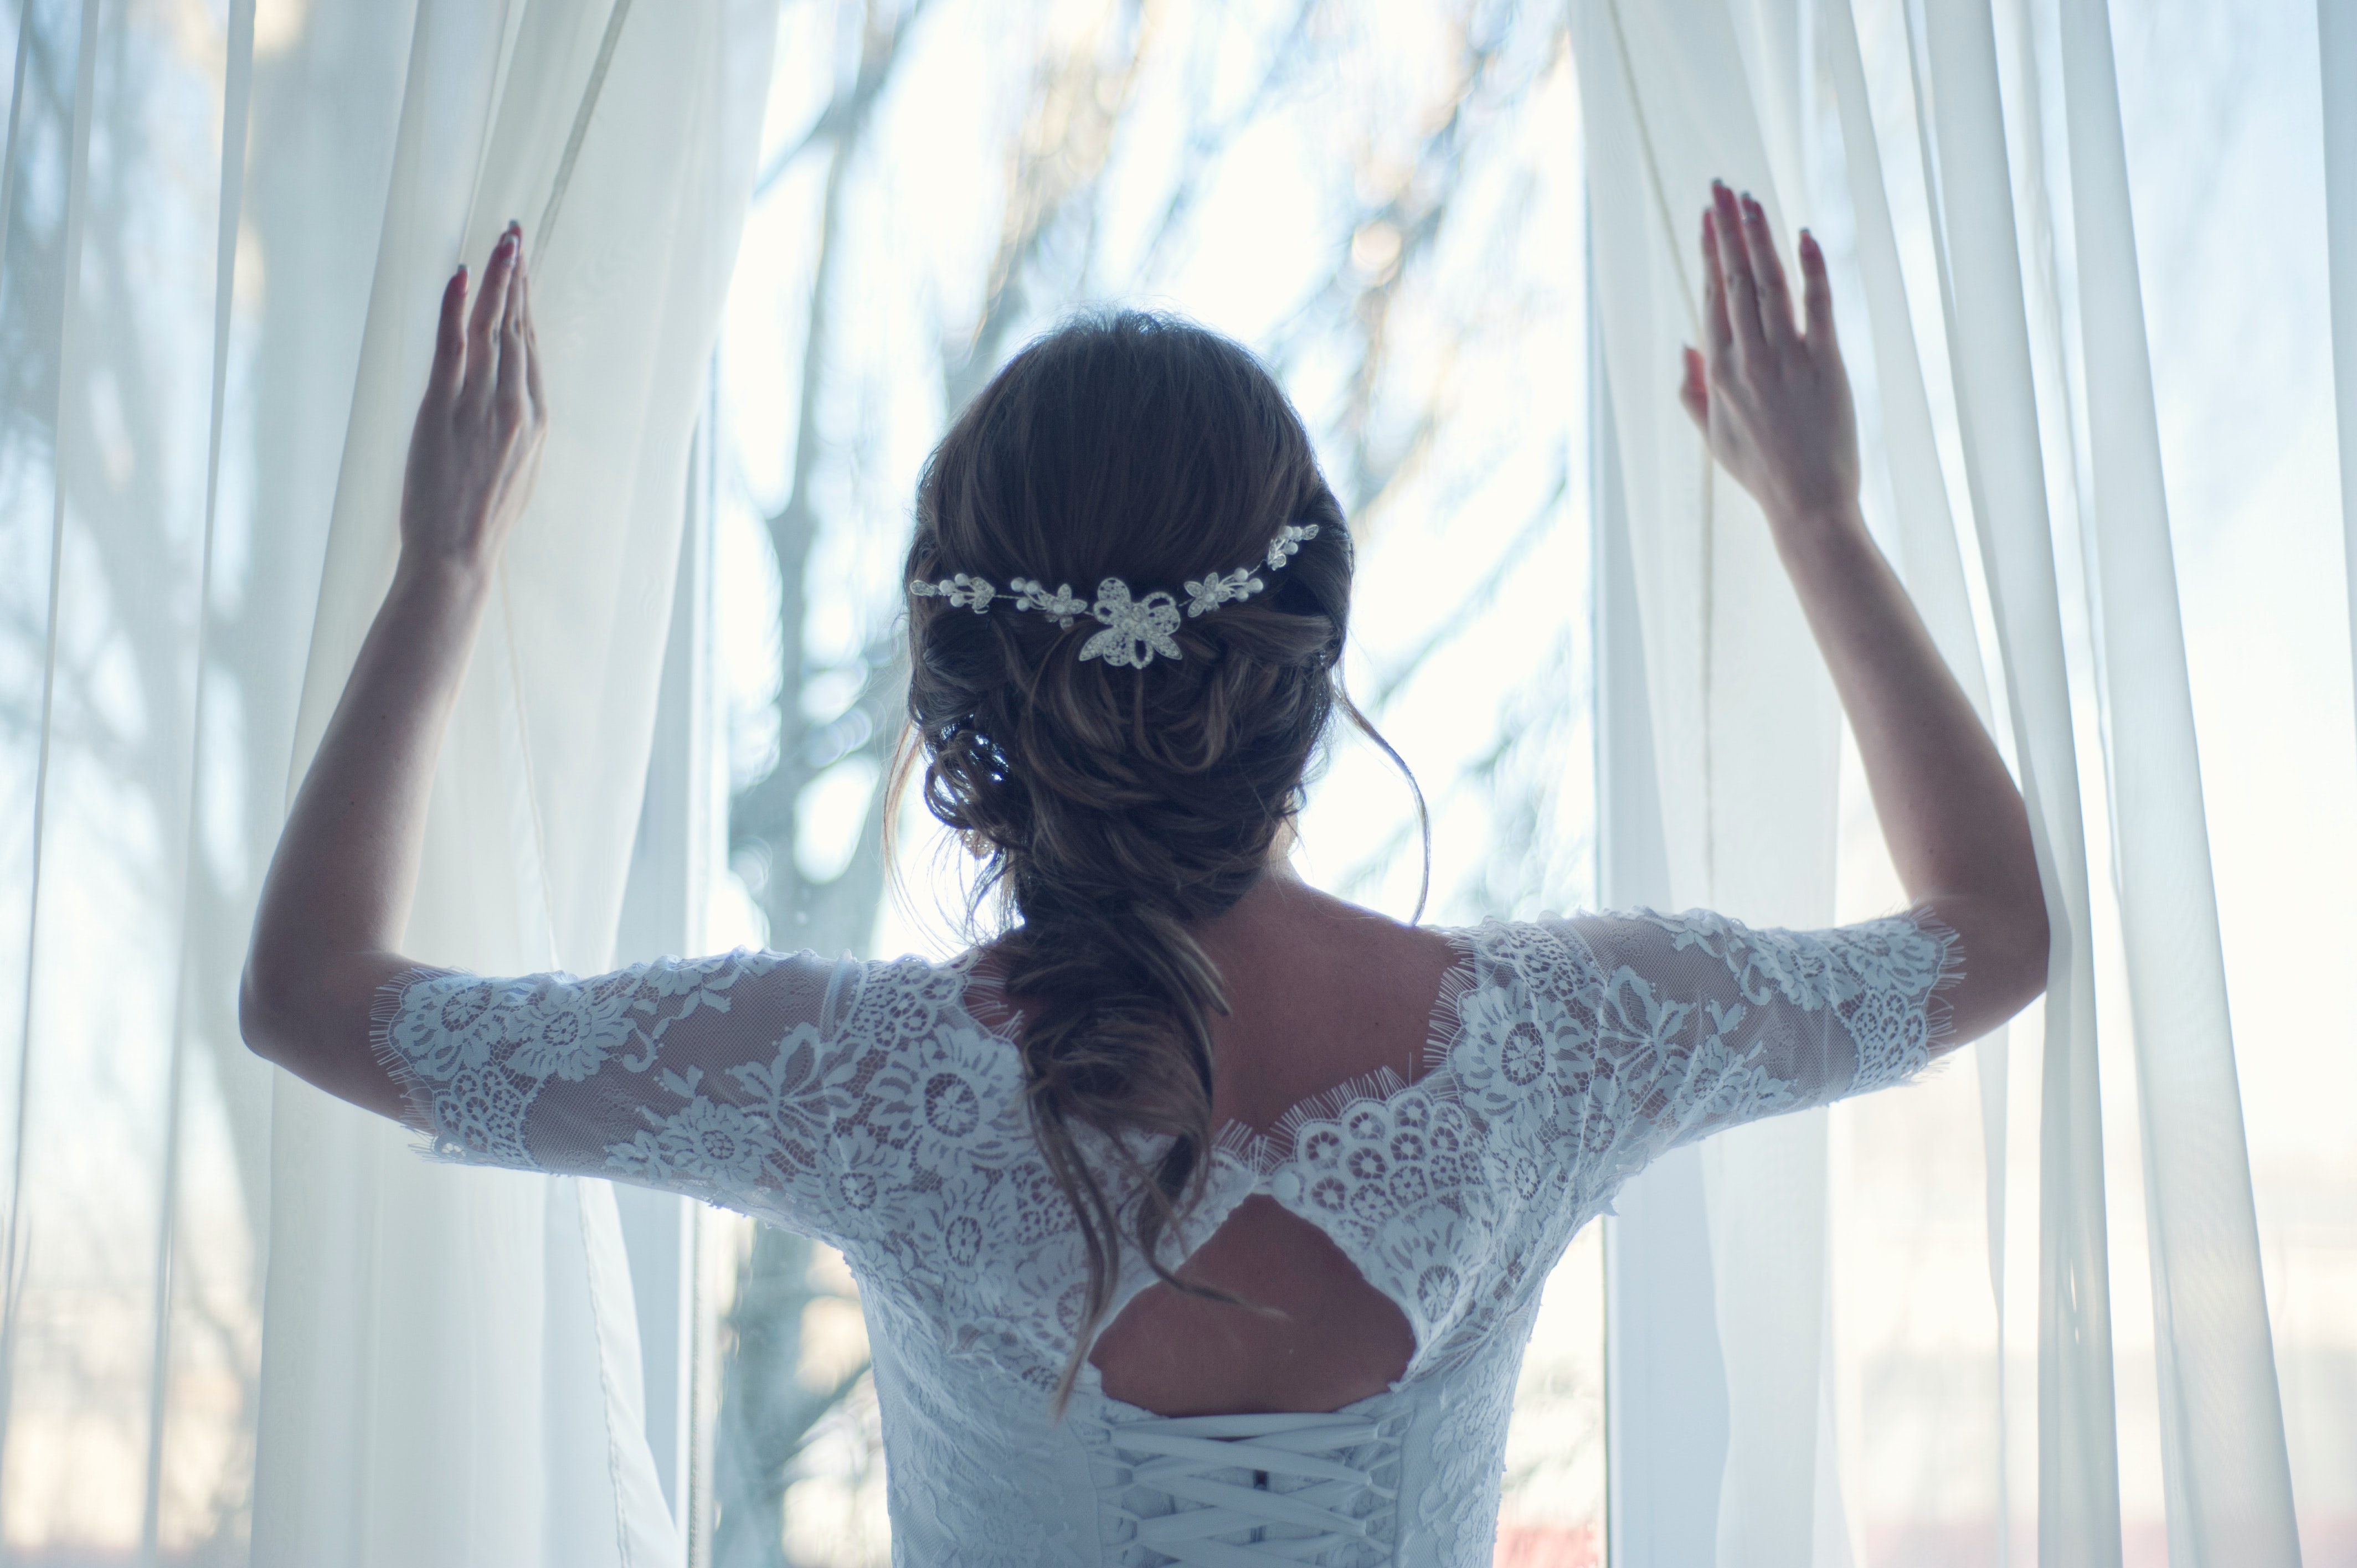 A bride opening curtains. | Source: Pexels